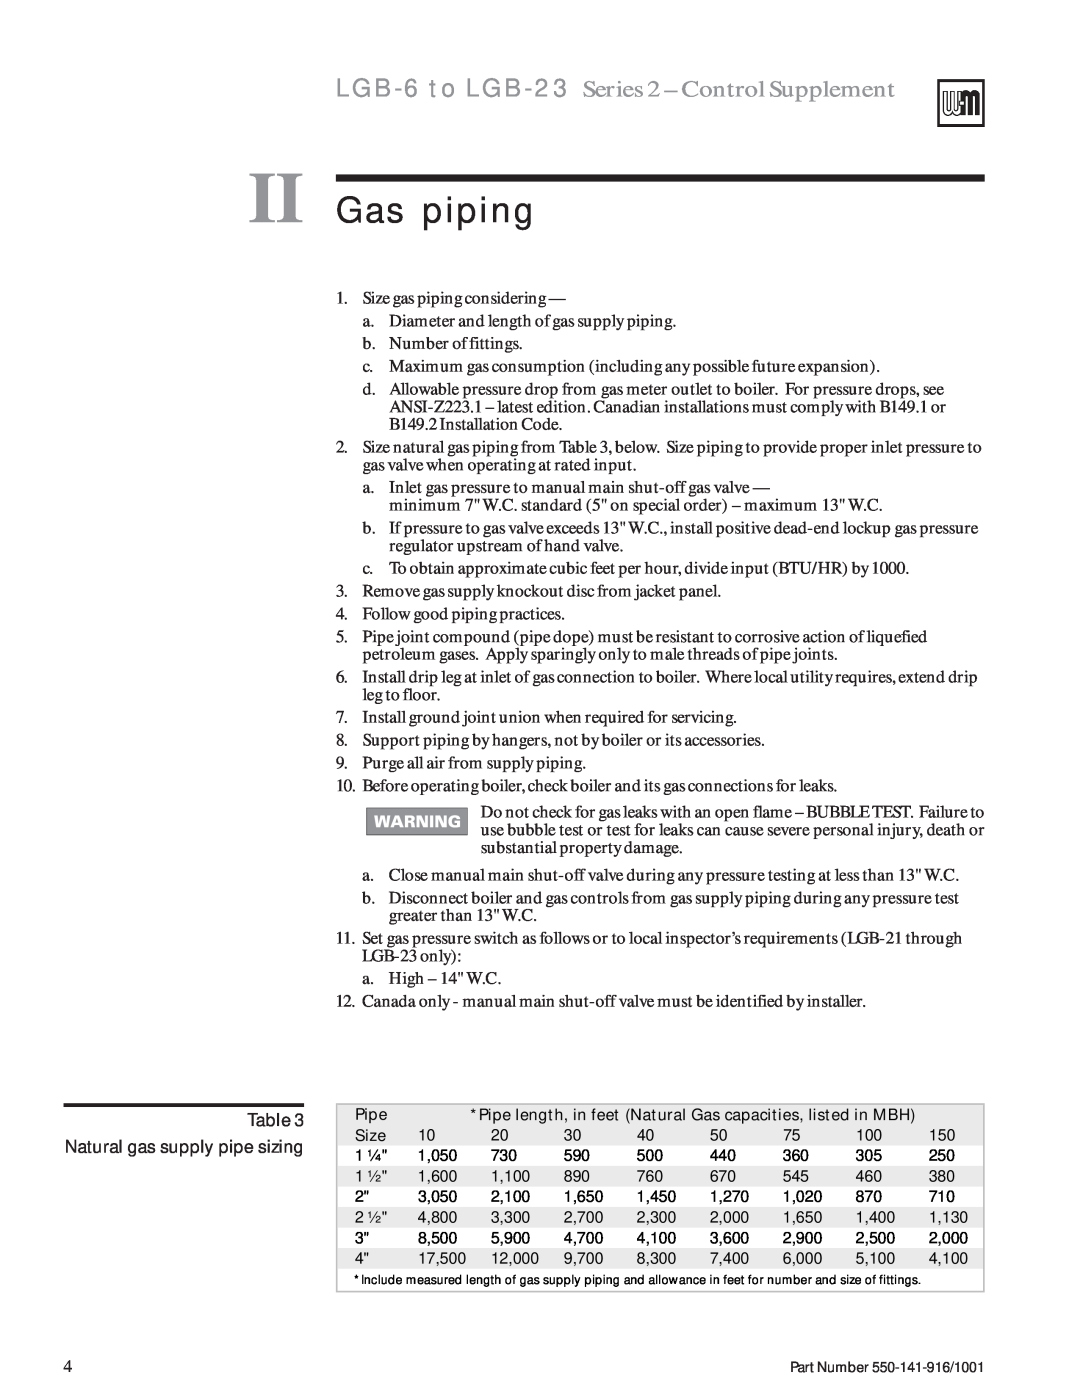 Weil-McLain manual II Gas piping, LGB-6to LGB-23 Series 2 - Control Supplement, Natural gas supply pipe sizing 